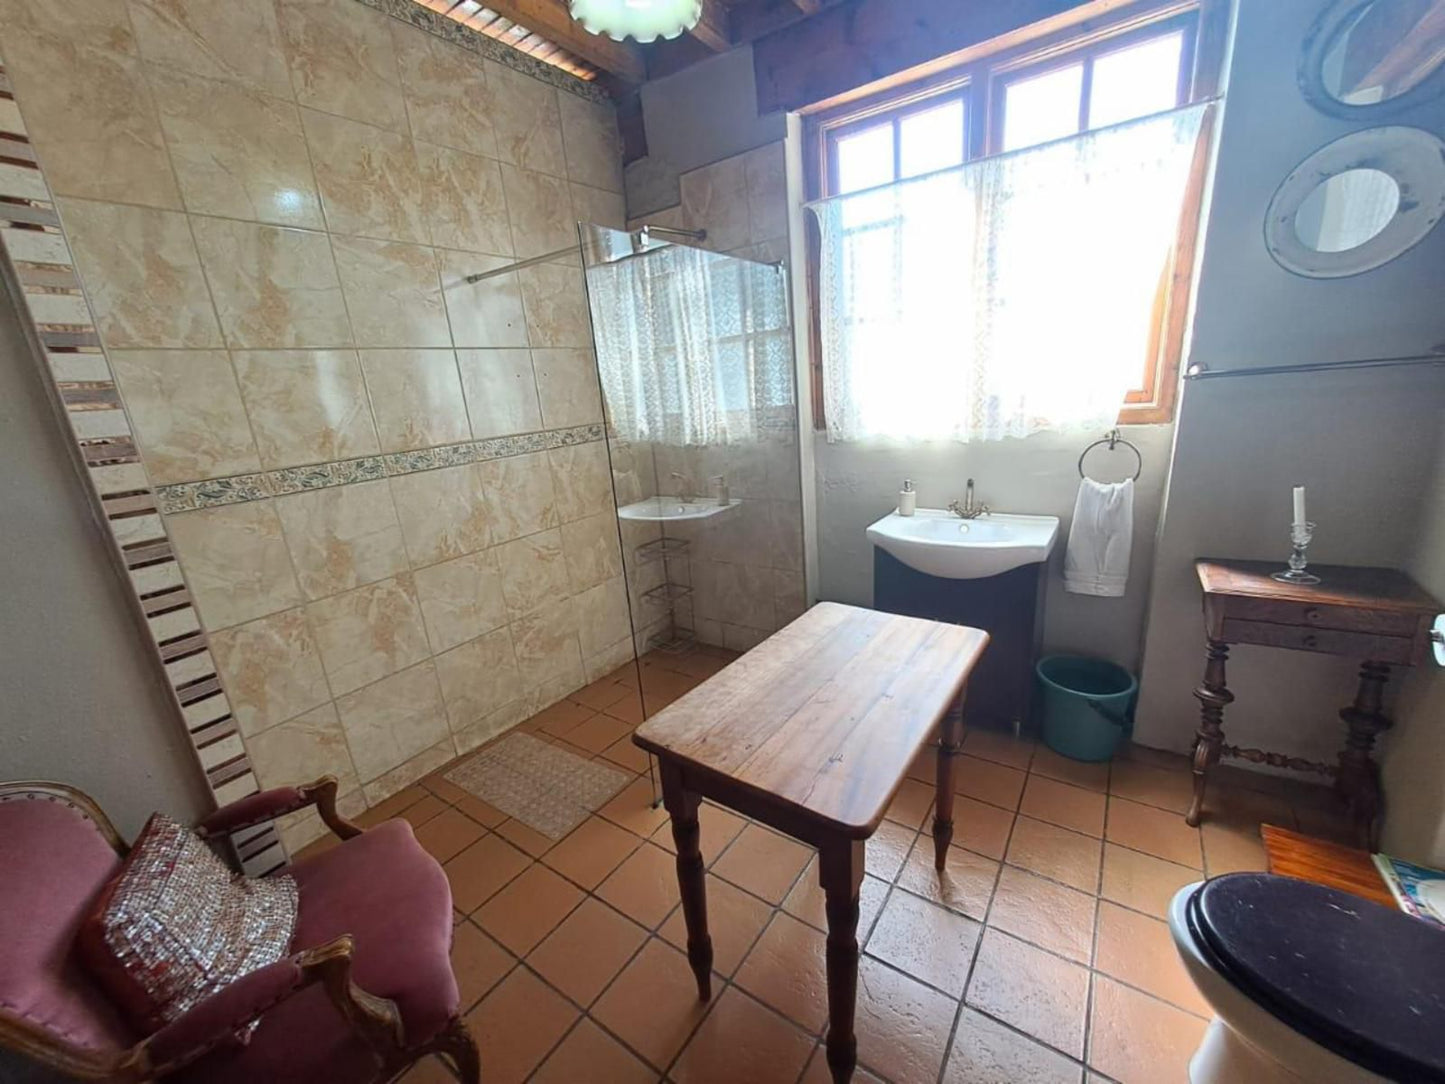 Pandora S Guesthouse Bethlehem Free State South Africa Bathroom